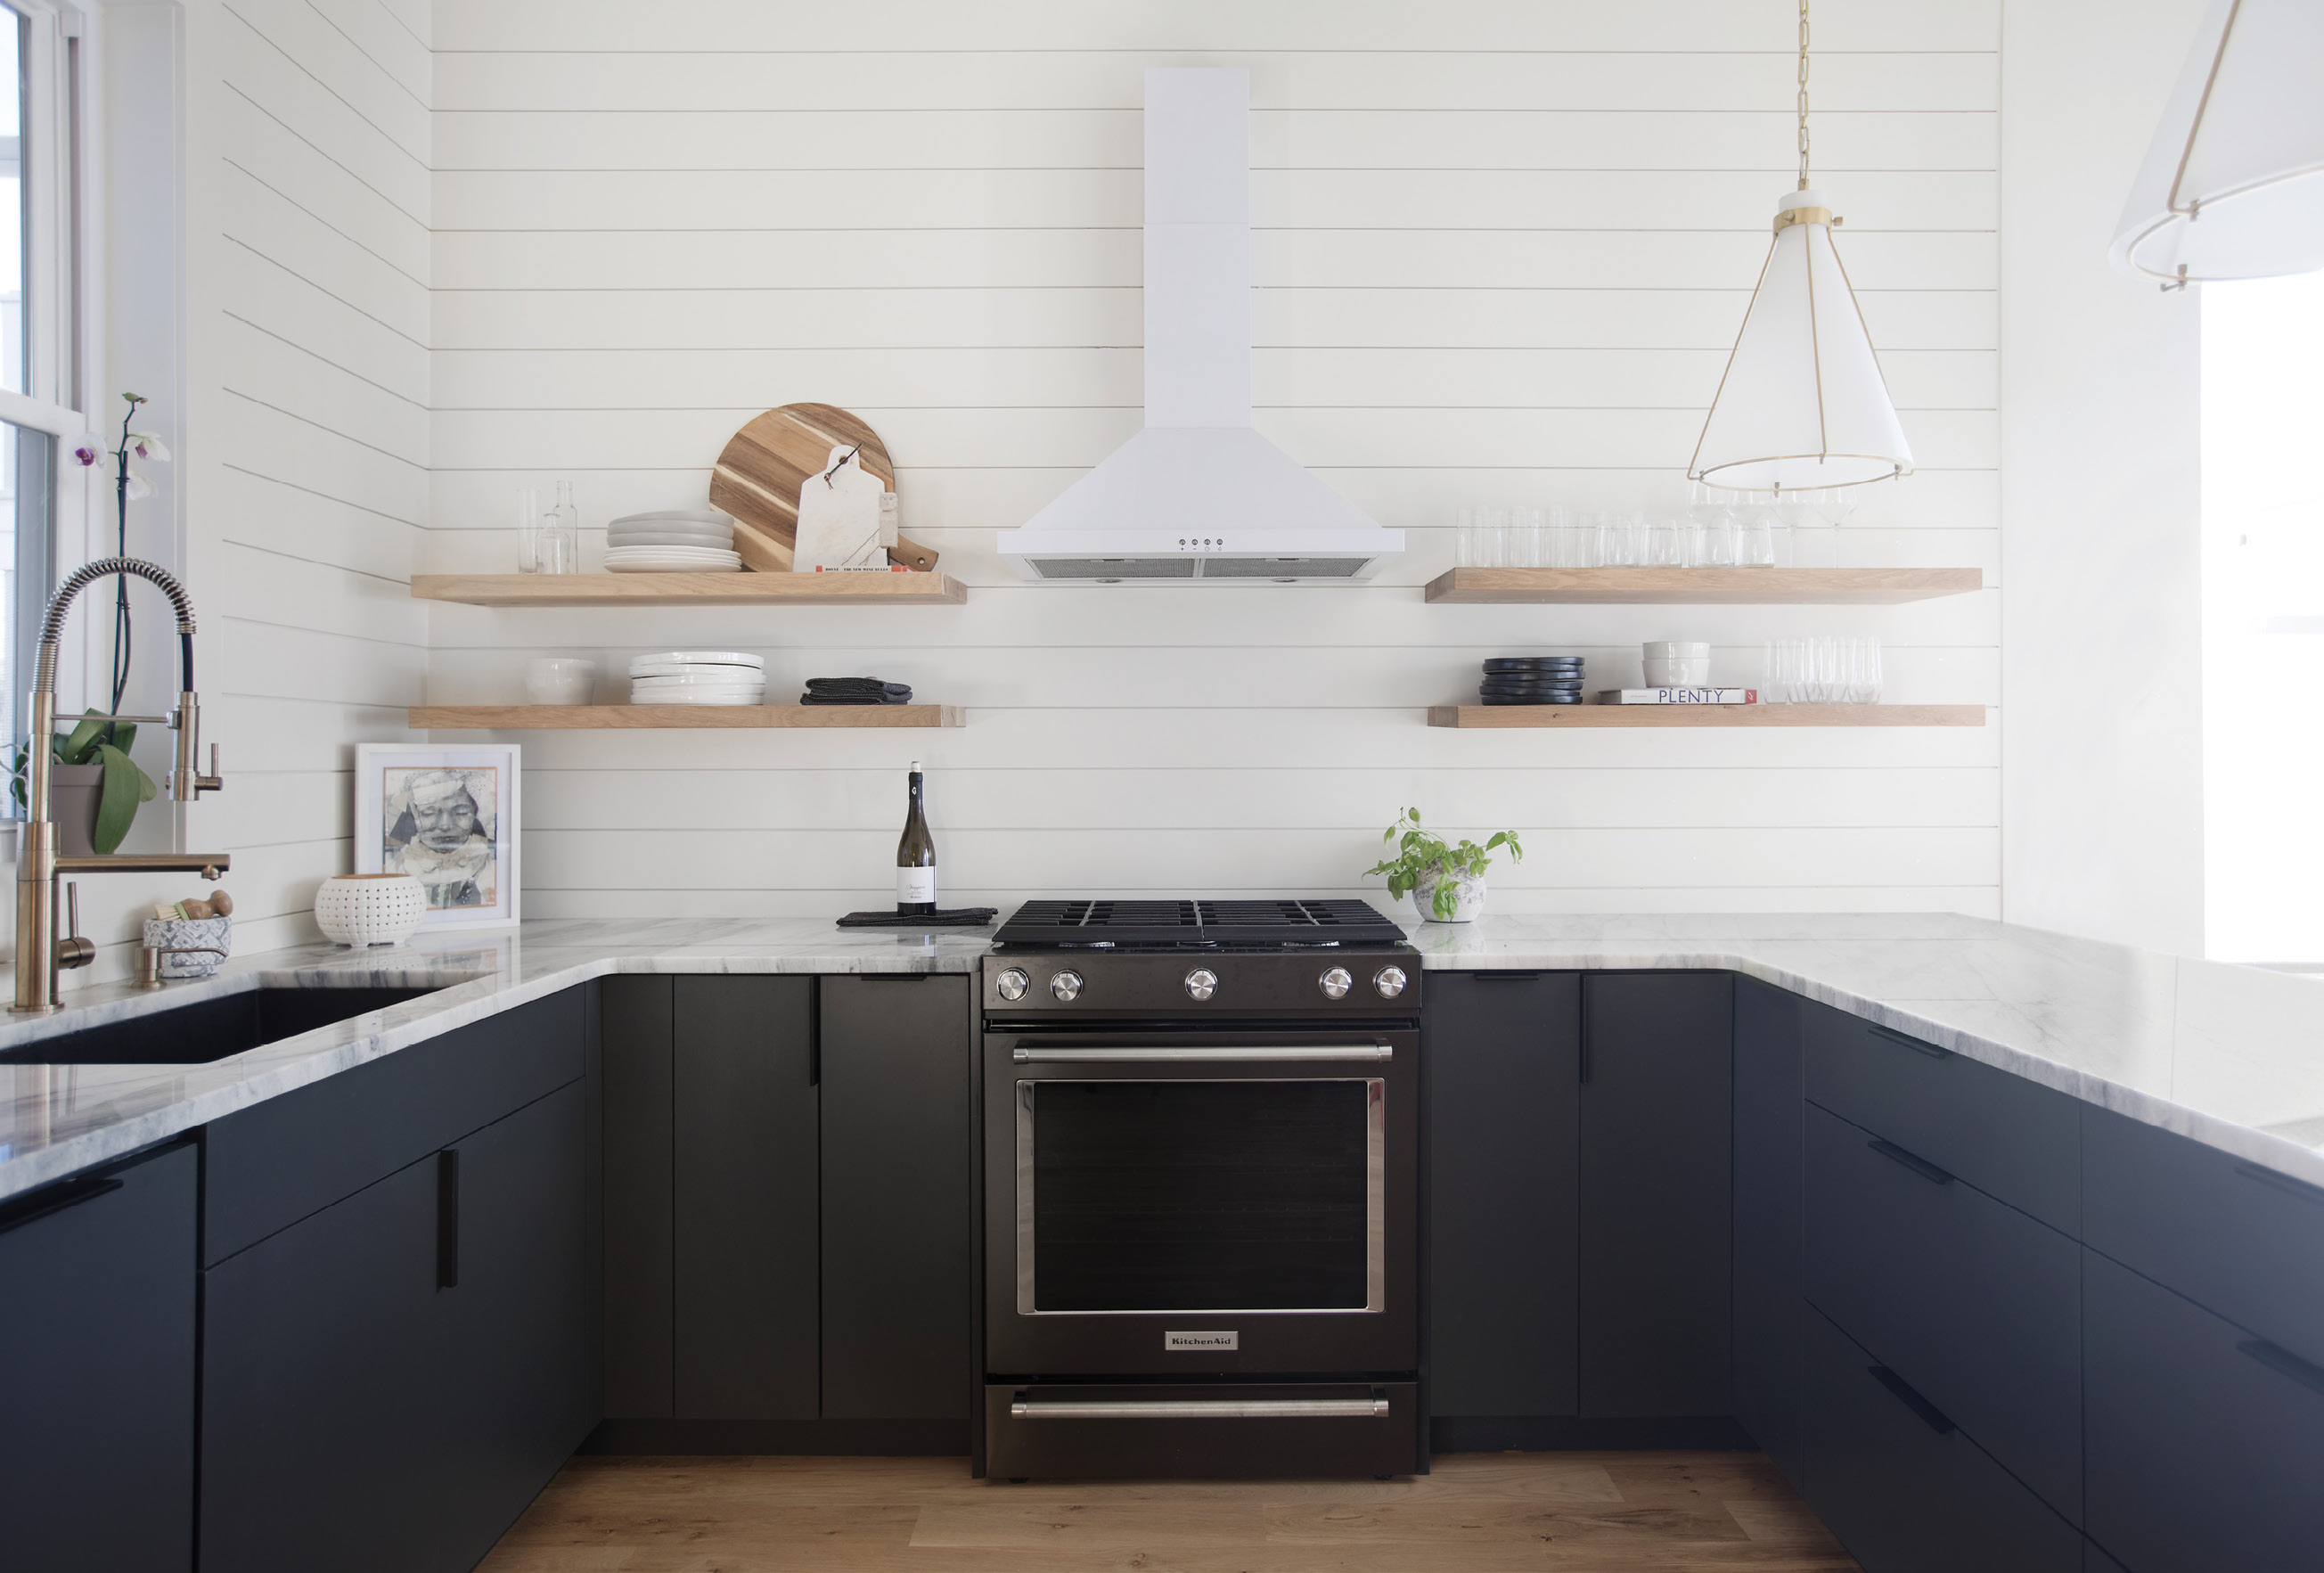 LINEAR THINKING: Open shelving and shiplap walls create an inviting kitchen space that flows seamlessly from the adjoining dining area, replete with green velvet chairs by Moes (“They’re so easy to clean!” says Vickers). She chose shiplap as it’s less expensive than a tile backsplash and helped with the continuity of the space.